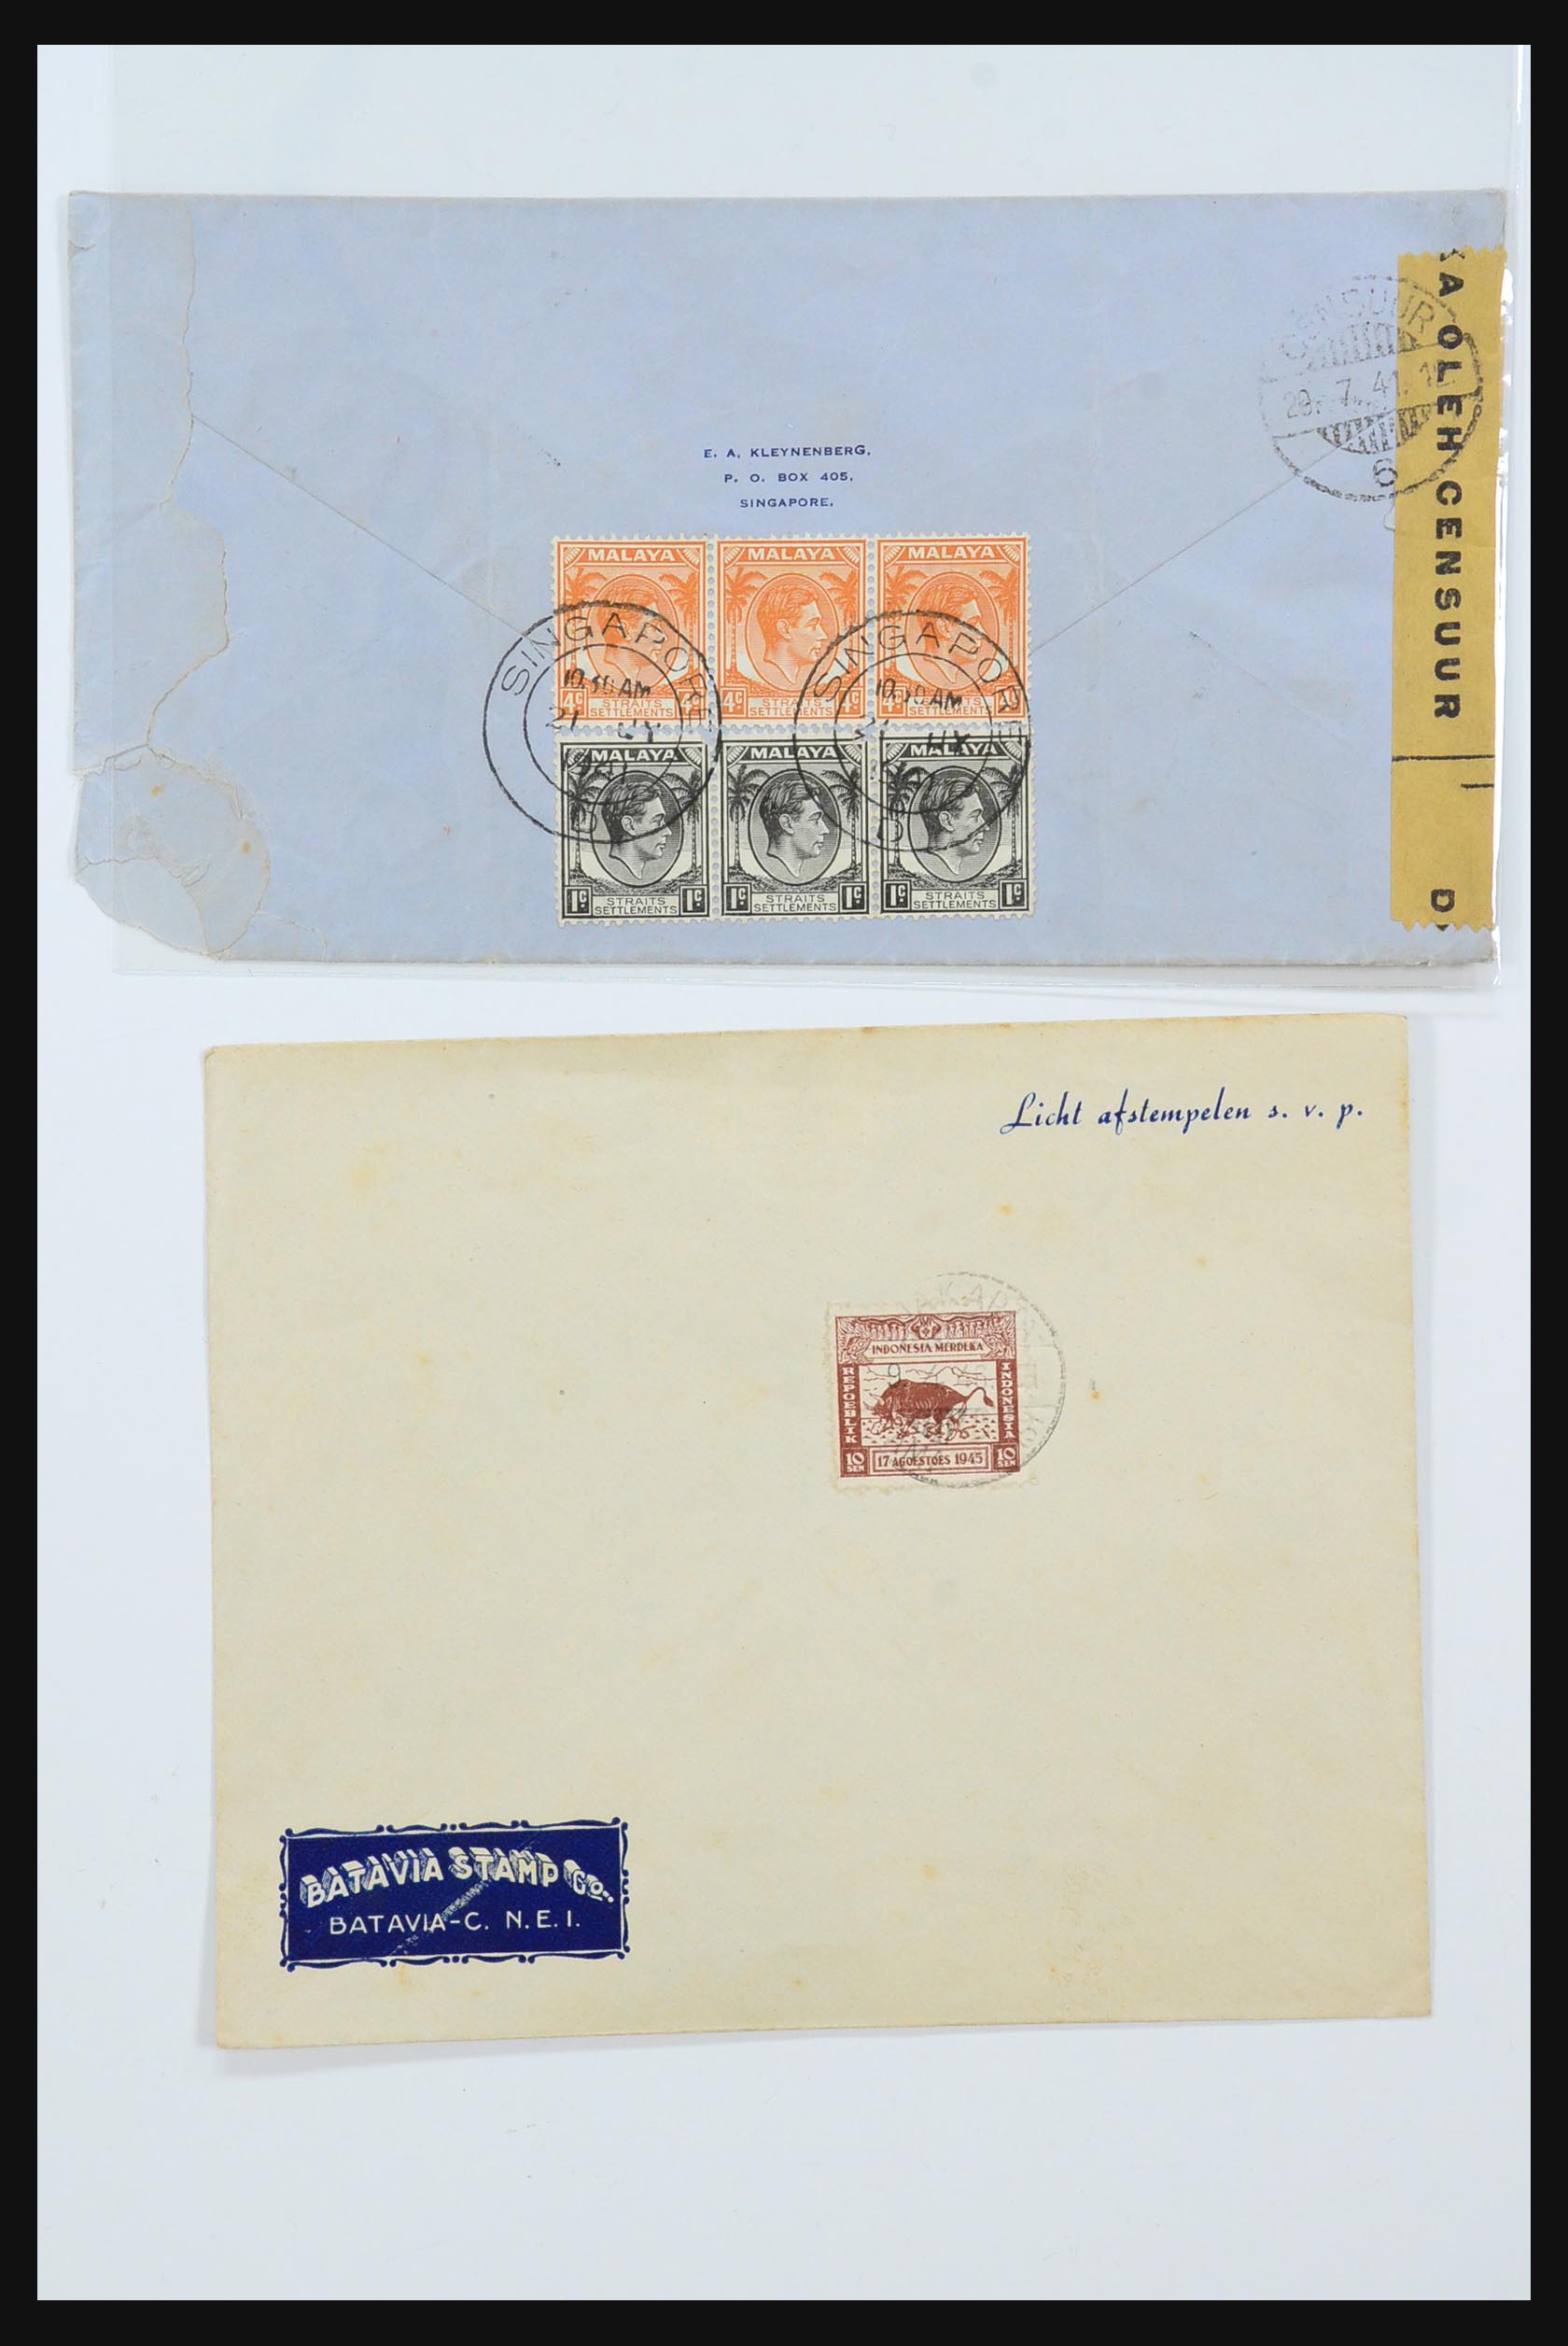 31362 023 - 31362 Netherlands Indies Japanese occupation covers 1942-1945.